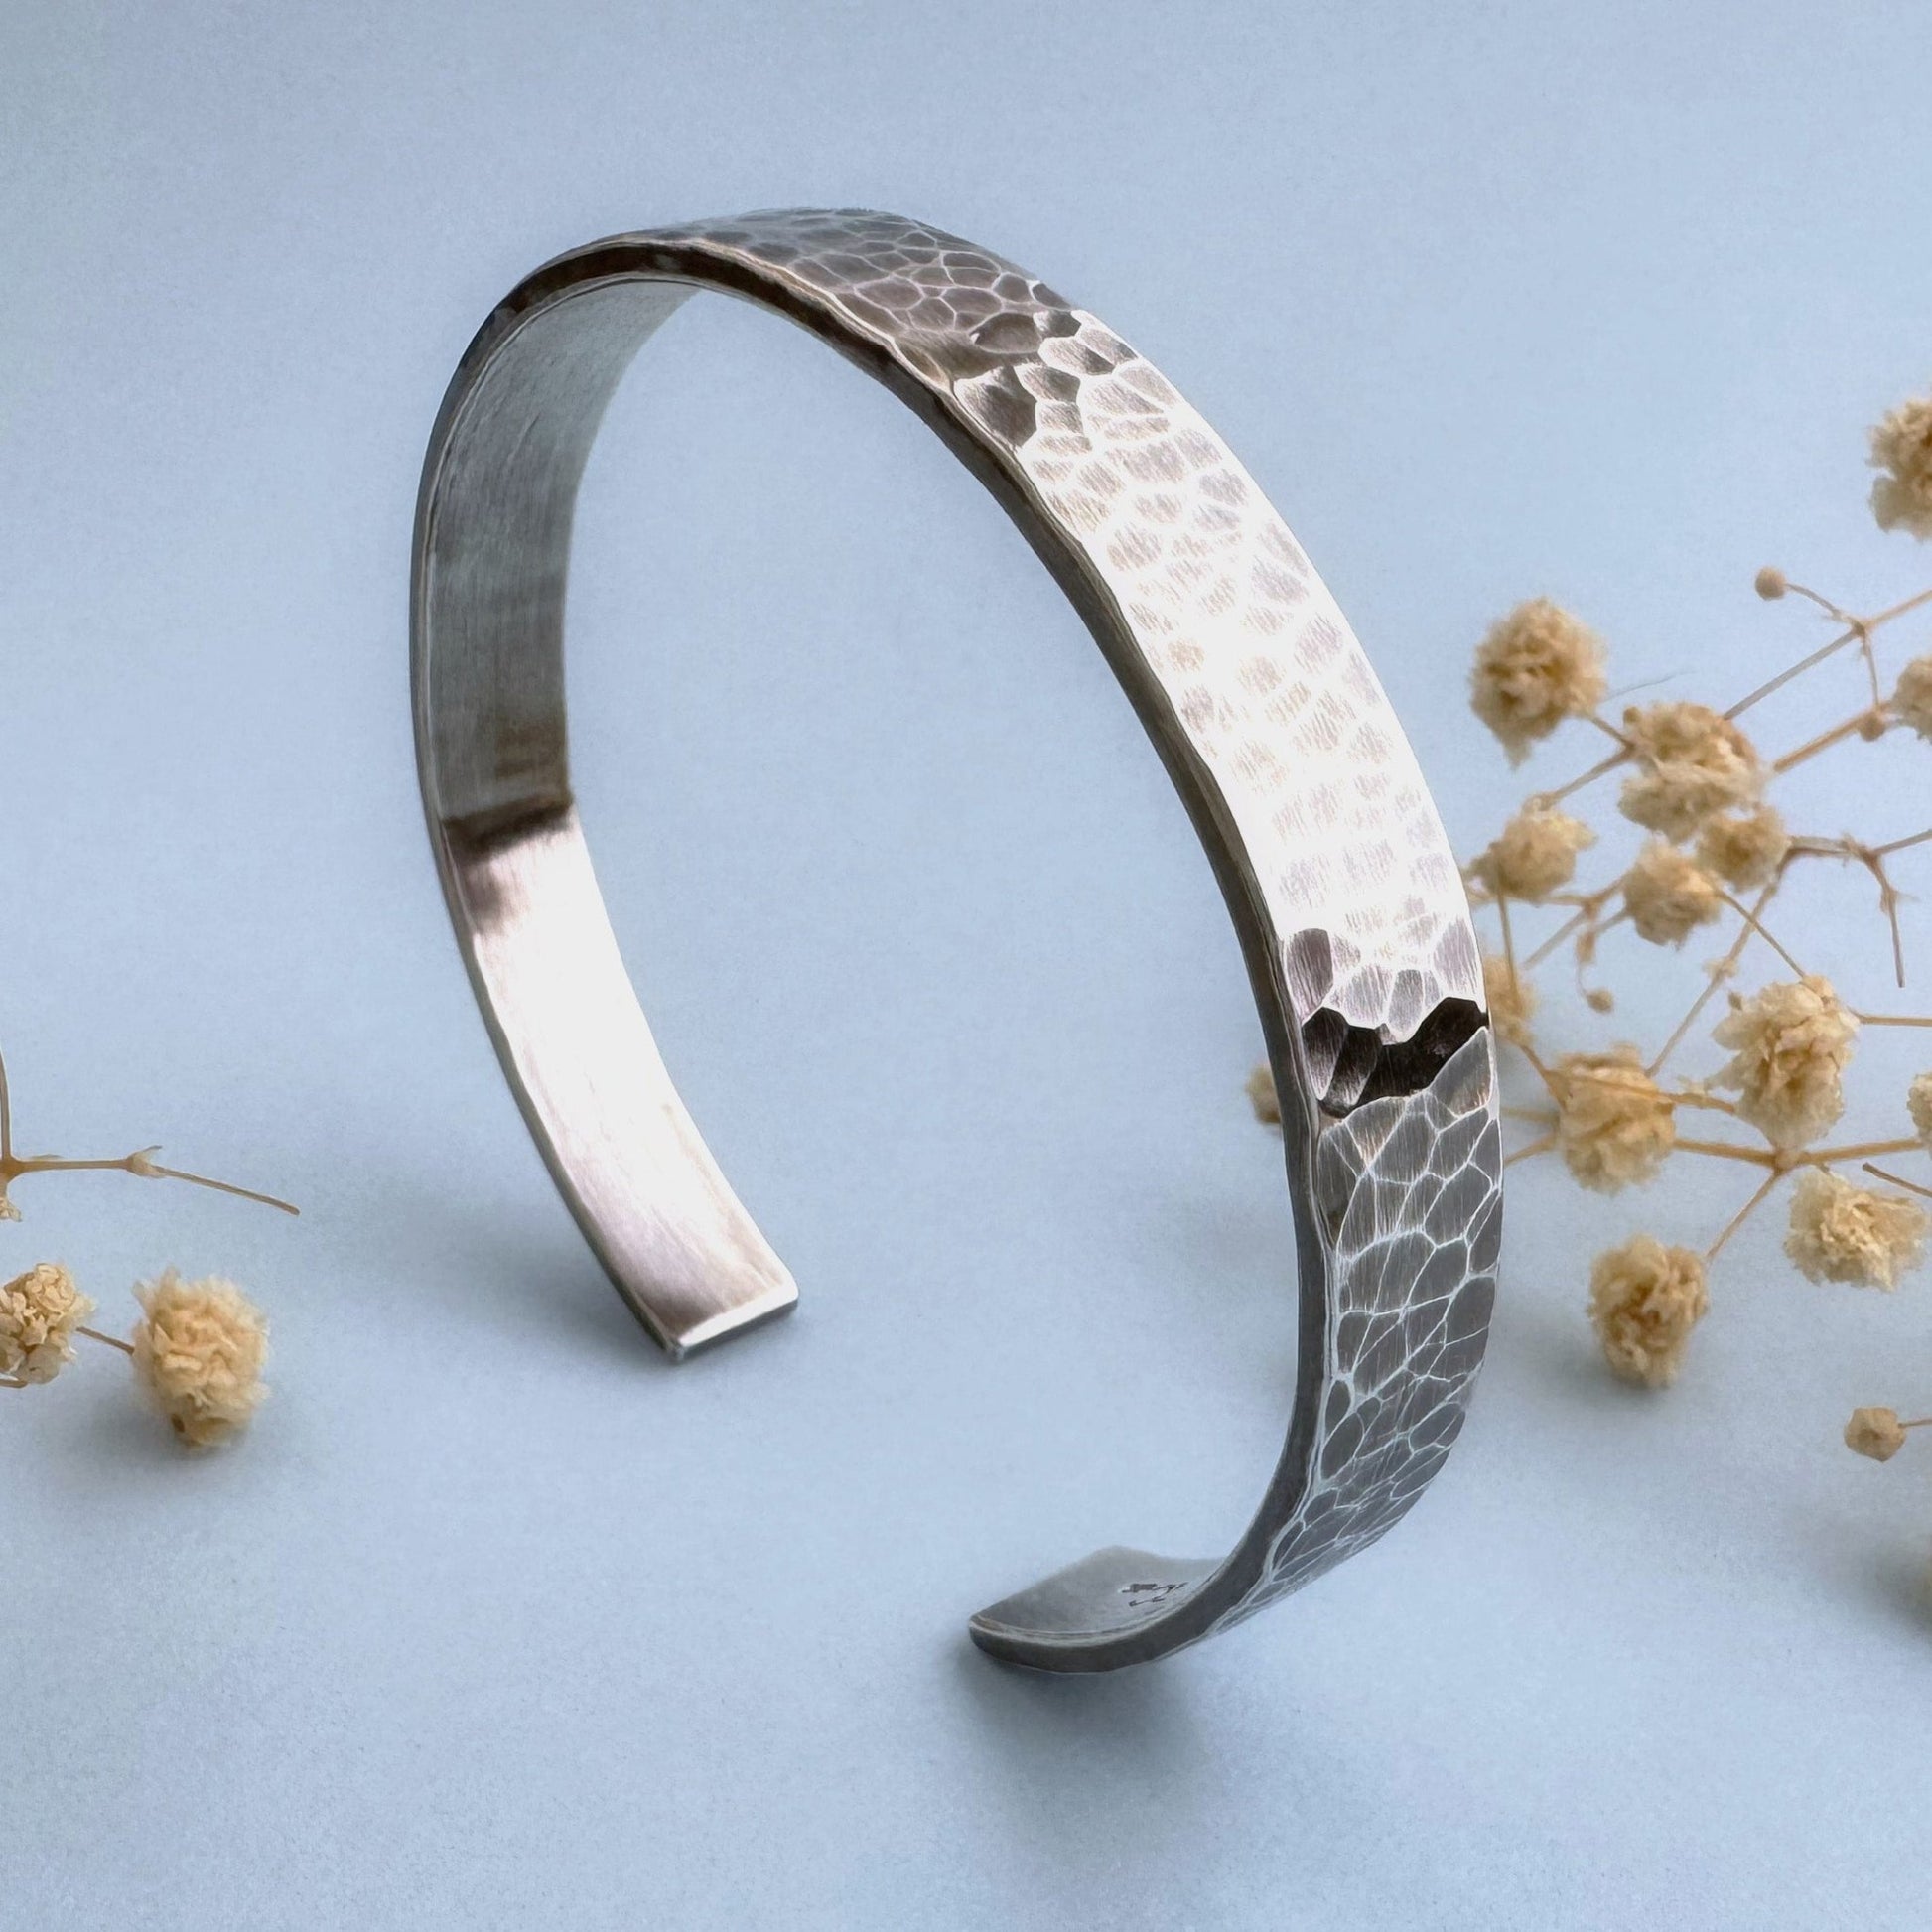 A heavy, hammered/beaten sterling silver cuff bracelet with a blackened finish is standing on a pale blue background. There are cream coloured dried flowers behind it.